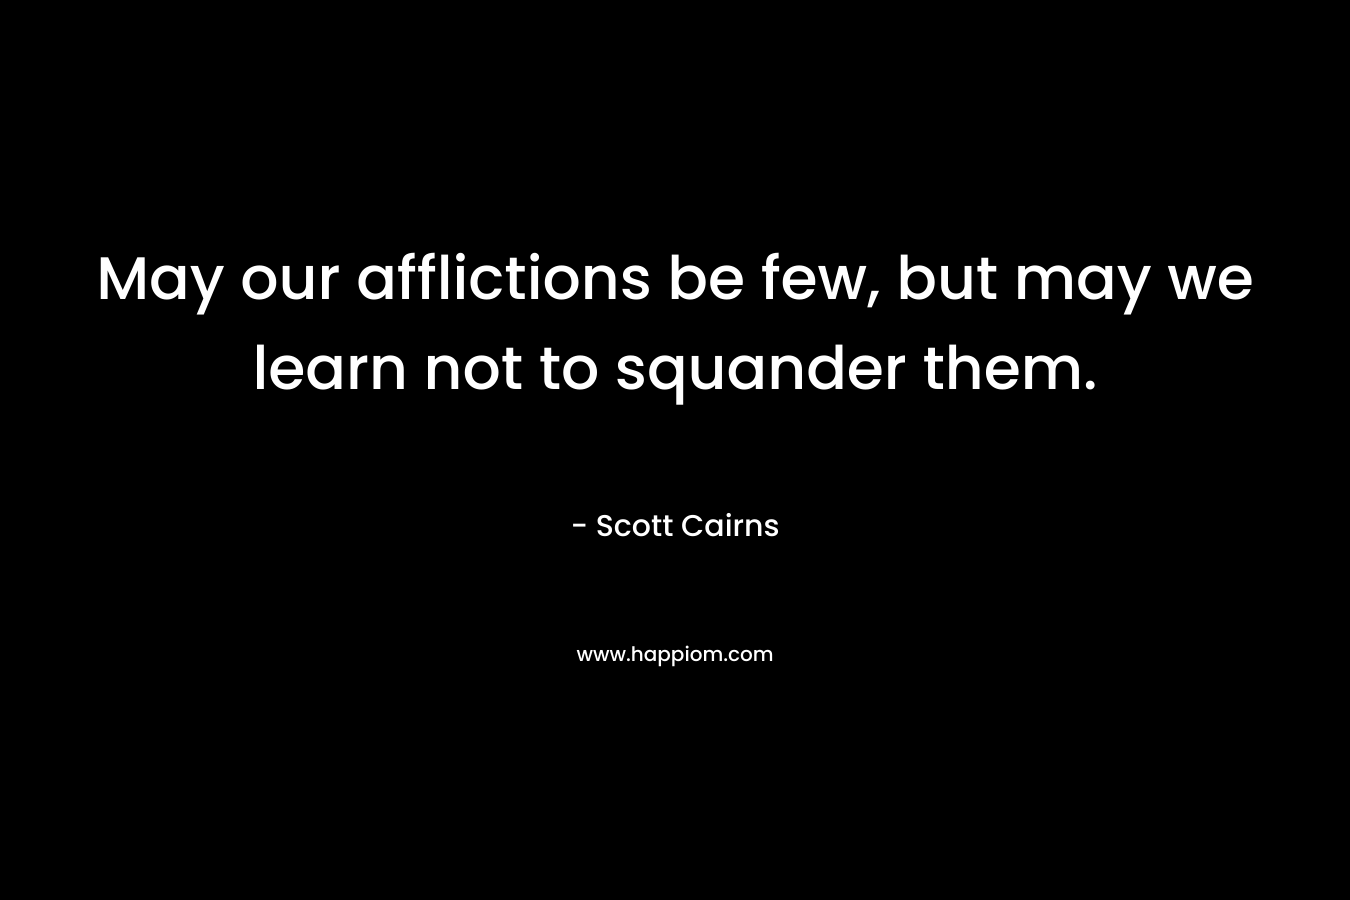 May our afflictions be few, but may we learn not to squander them. – Scott Cairns